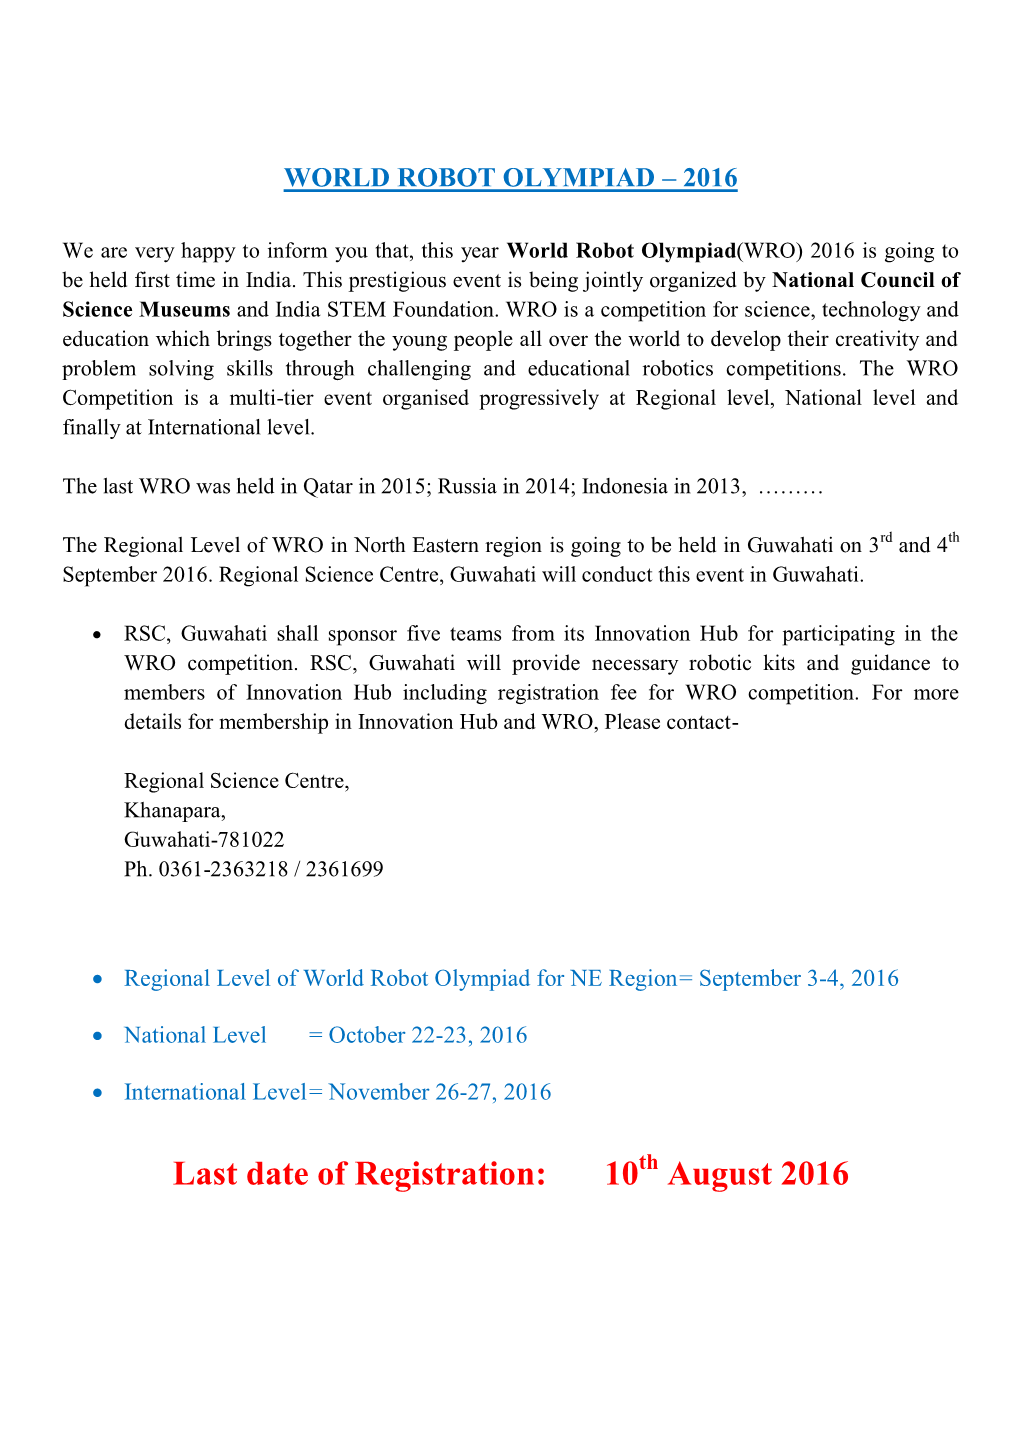 Last Date of Registration: 10Th August 2016